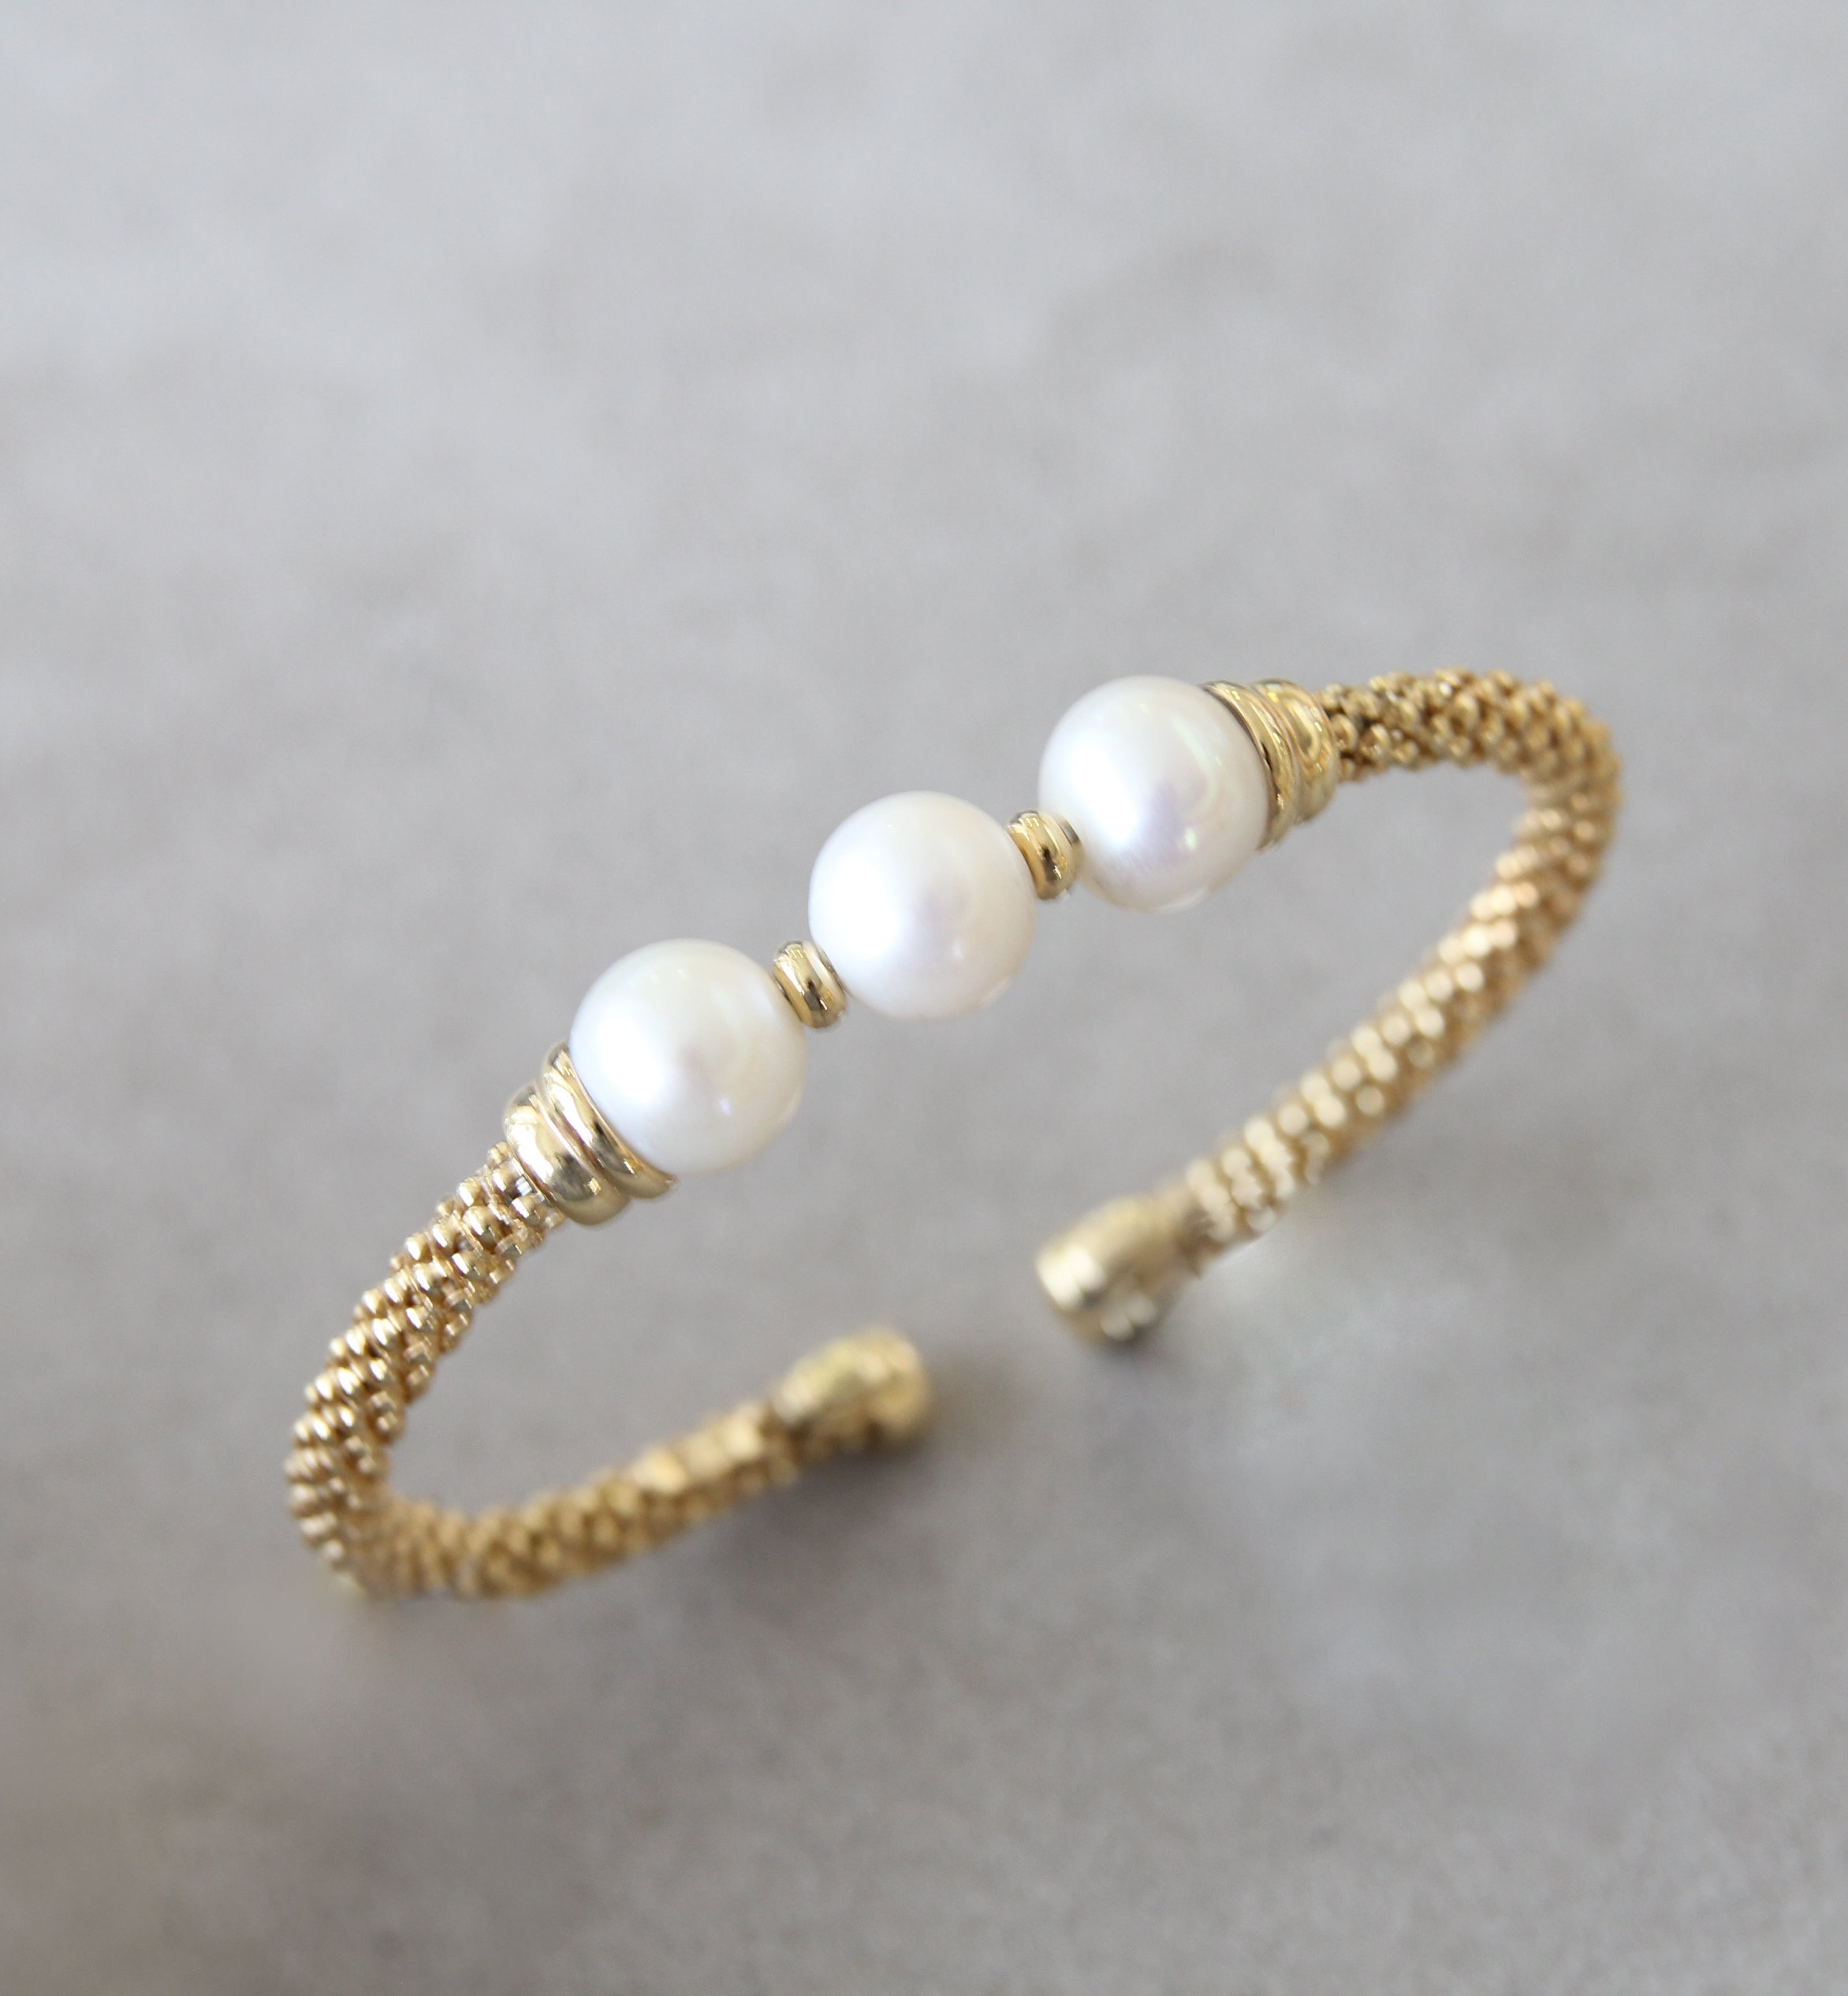 Silver 925 Bangle with Cultured Pearls